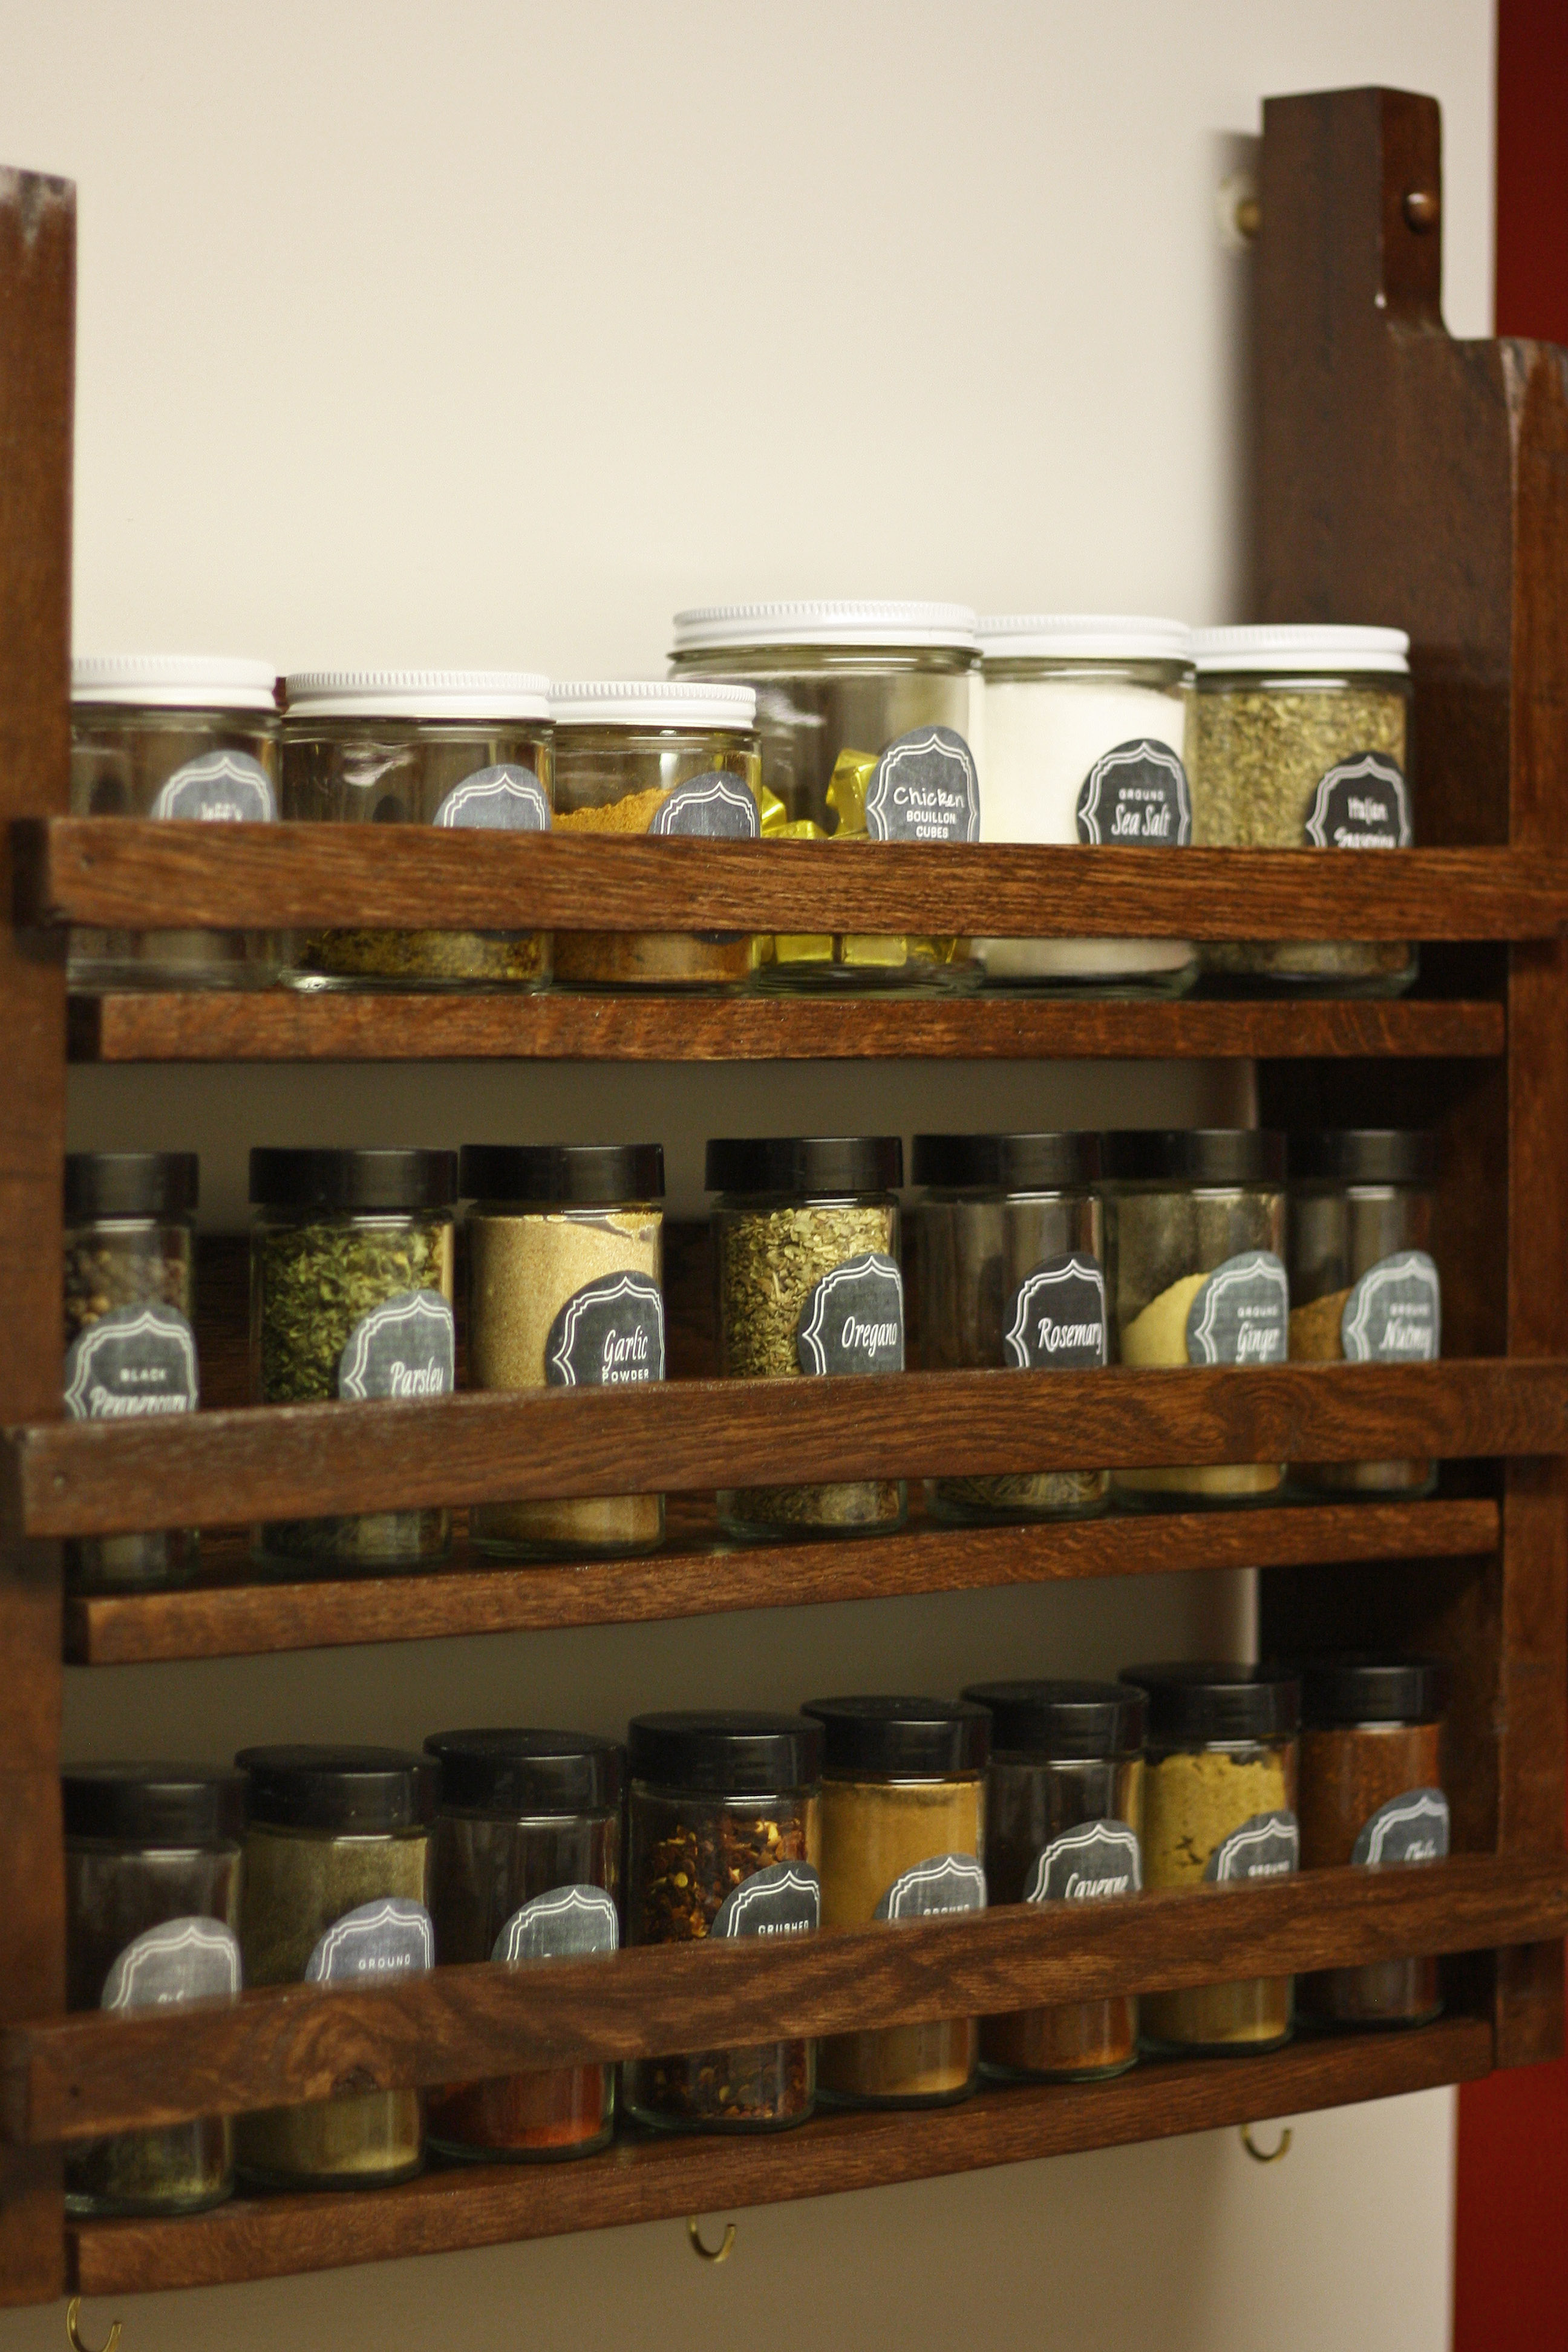 Spice Rack | Less Than Average Height